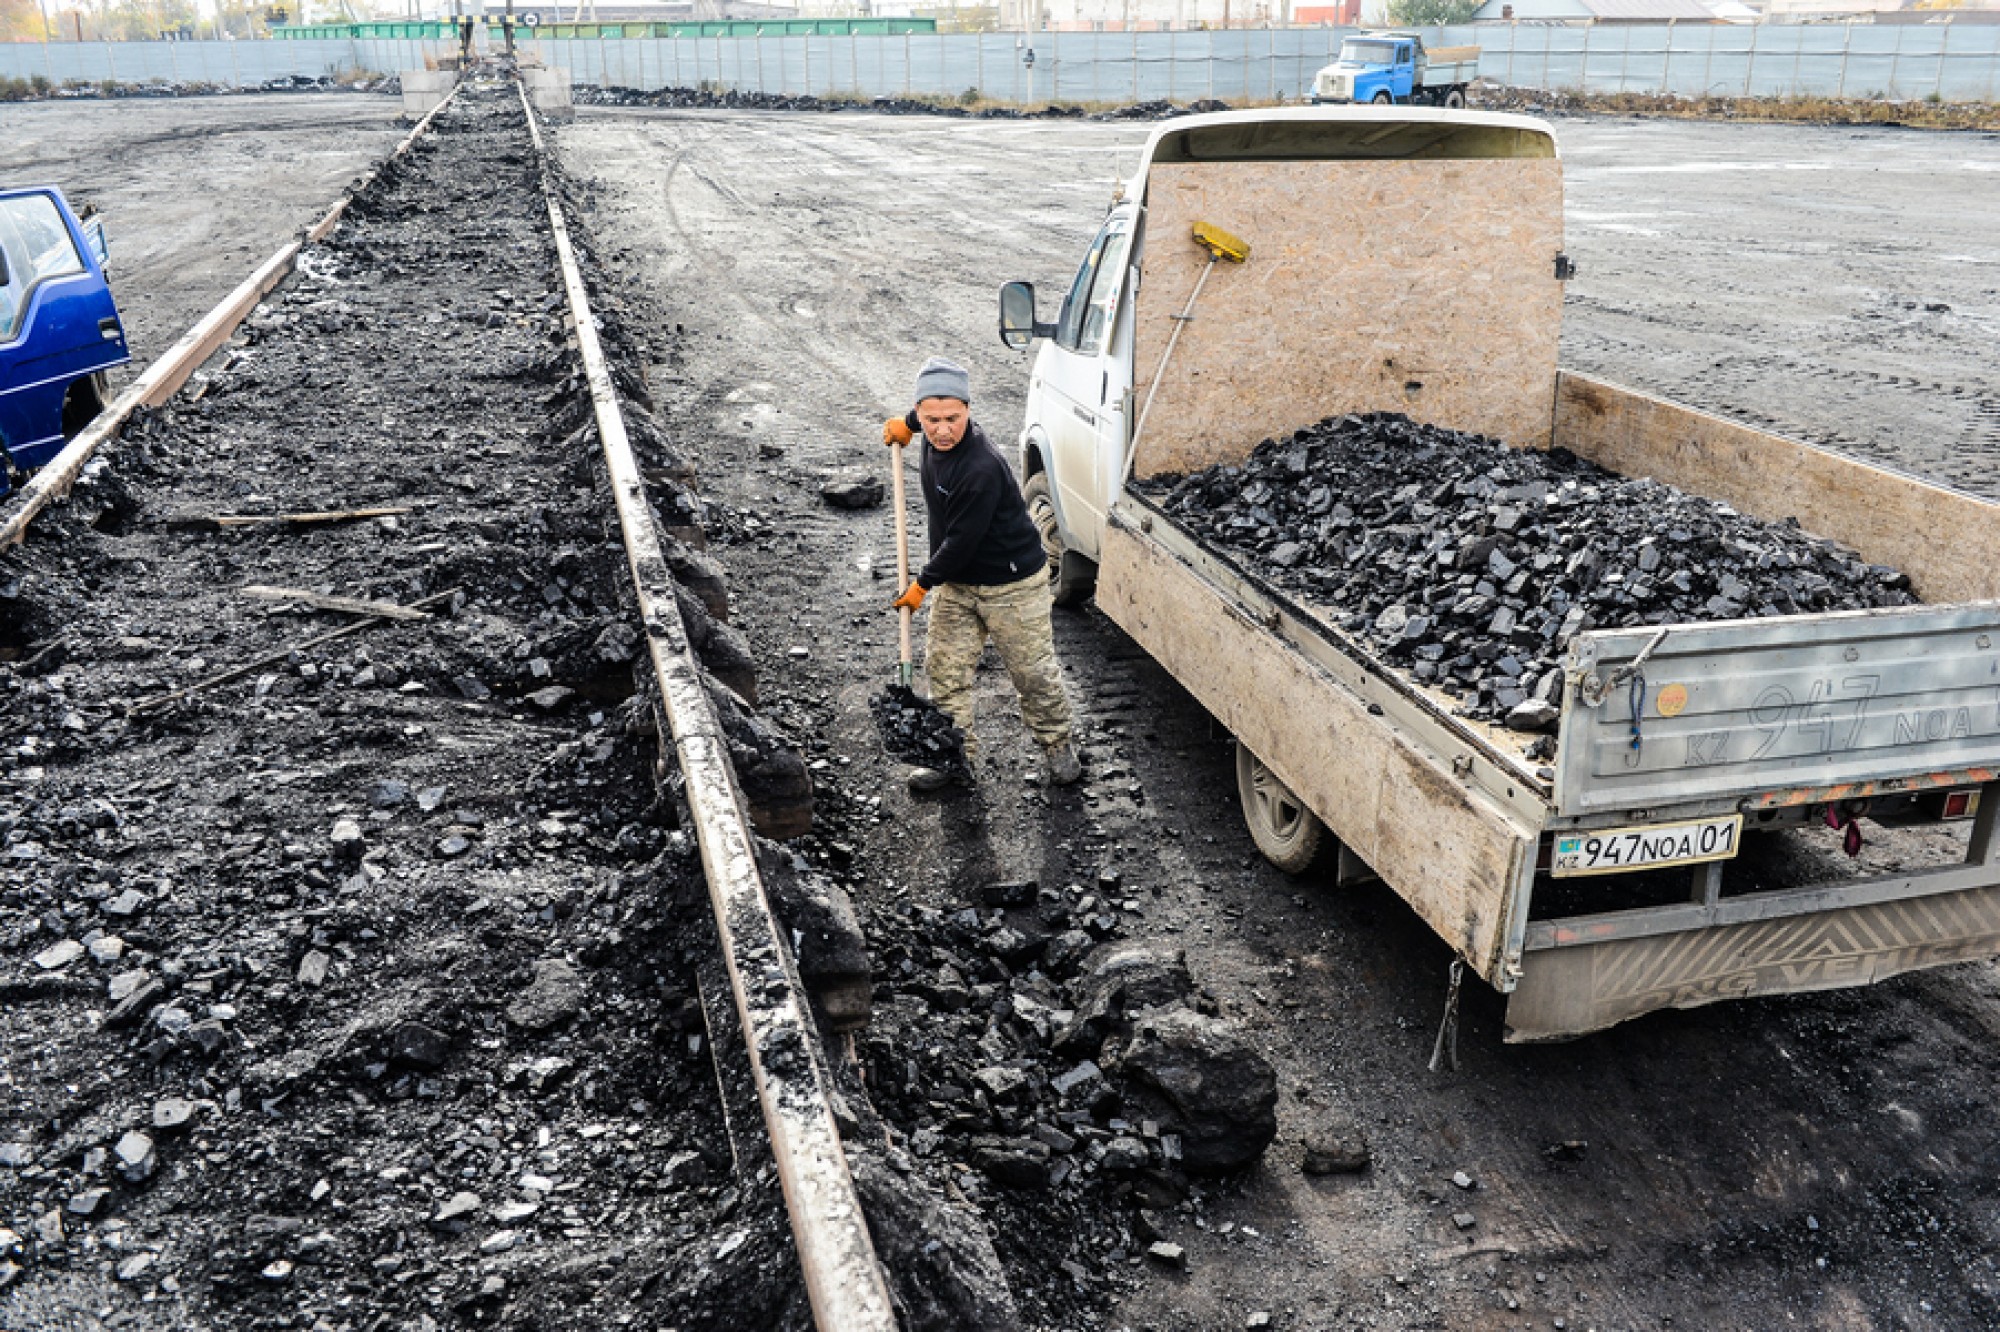 About 5.5 million tons of coal shipped to households and population — Roman Sklyar